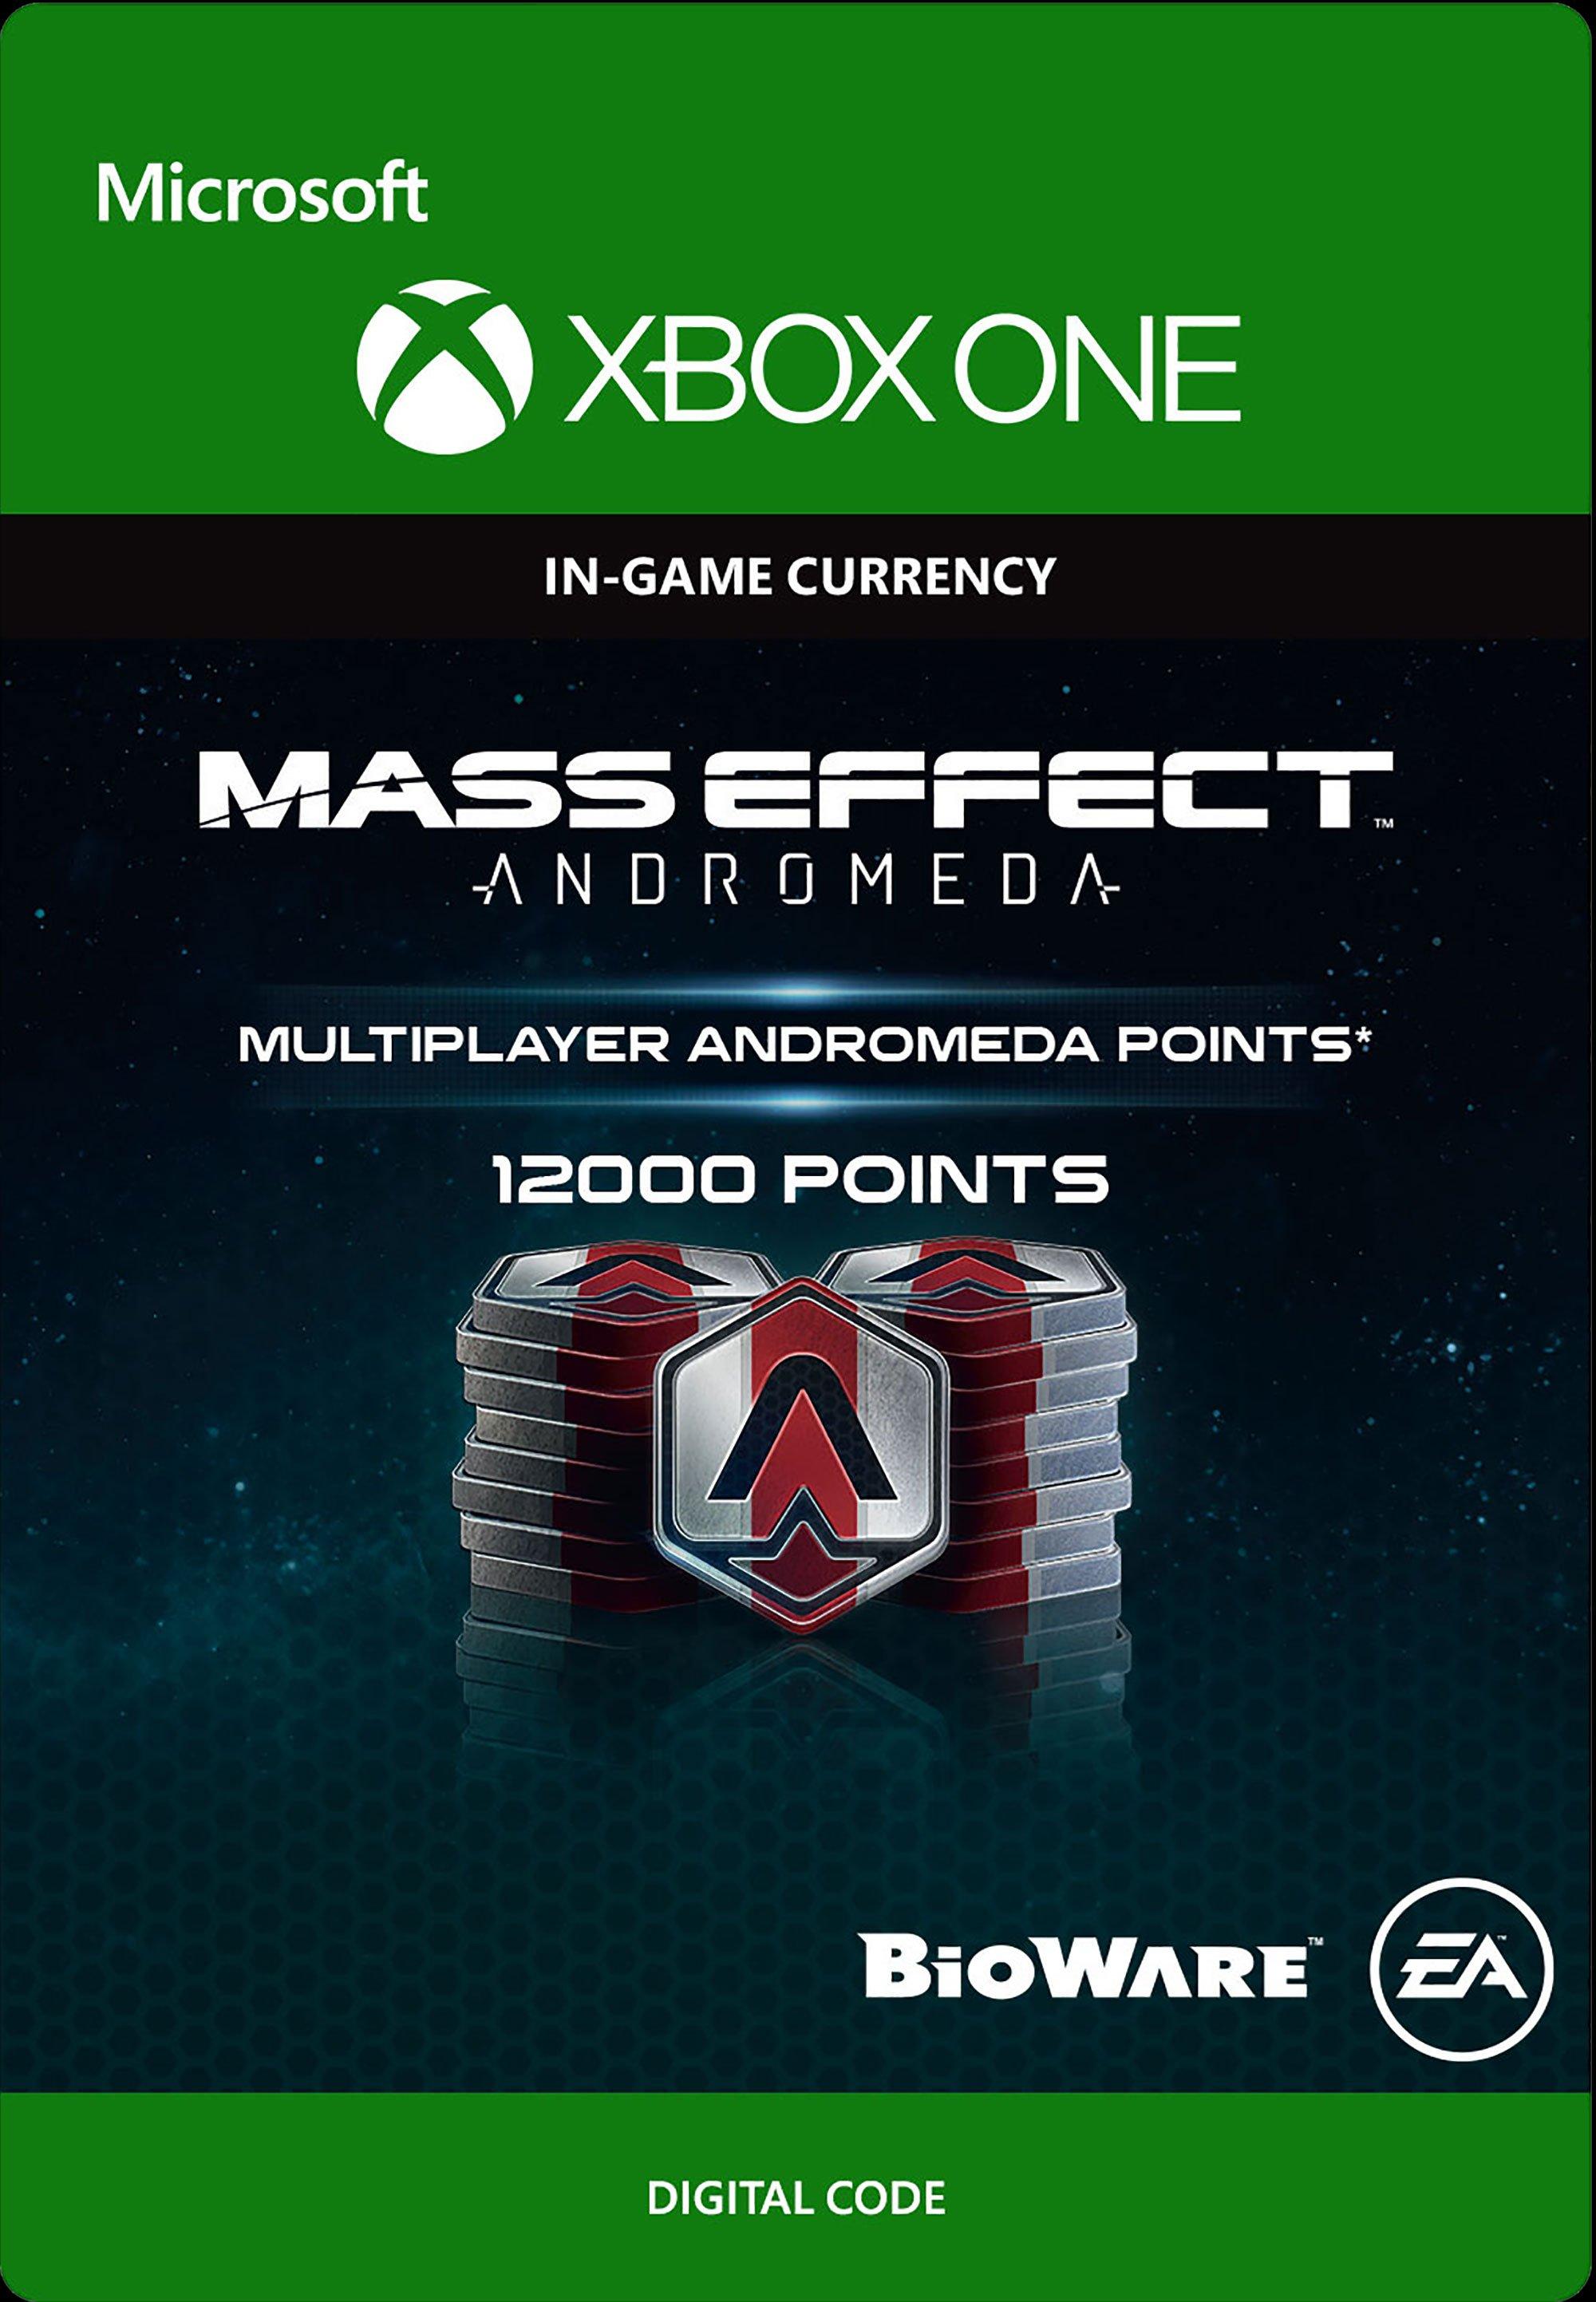 Mass Effect: Andromeda Andromeda Points 12,000 - Xbox One